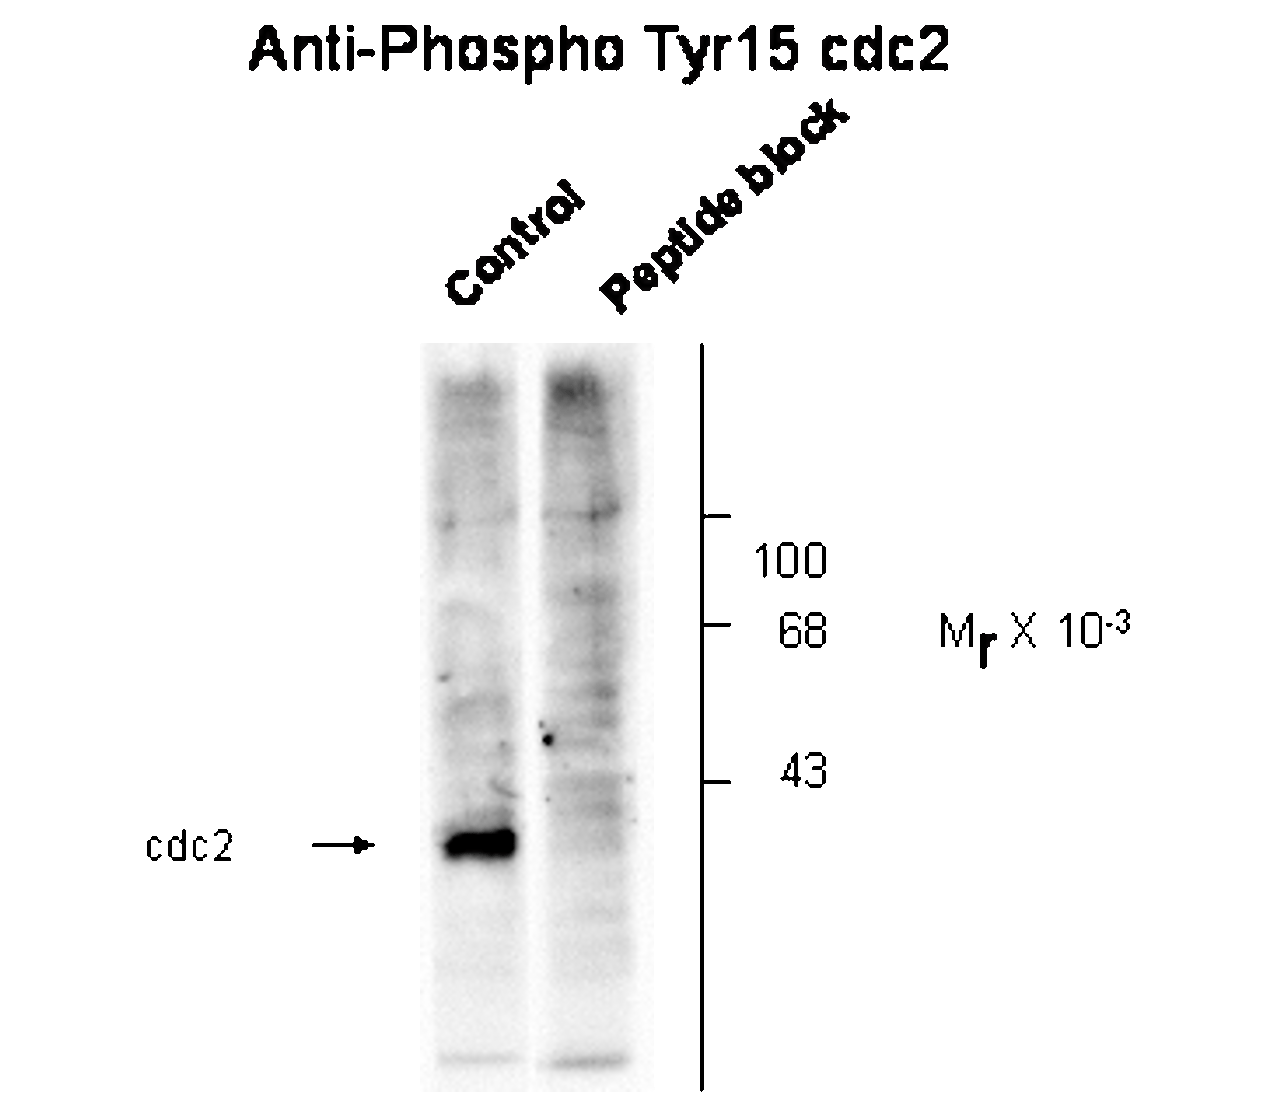 Western blot of human T47D cells showing phospho-specific immunolabeling of the ~34k cdc2 protein phosphorylated at Tyr15. In lane 2, cells were treated with EGF leading to dephosphorylation of Tyr15.